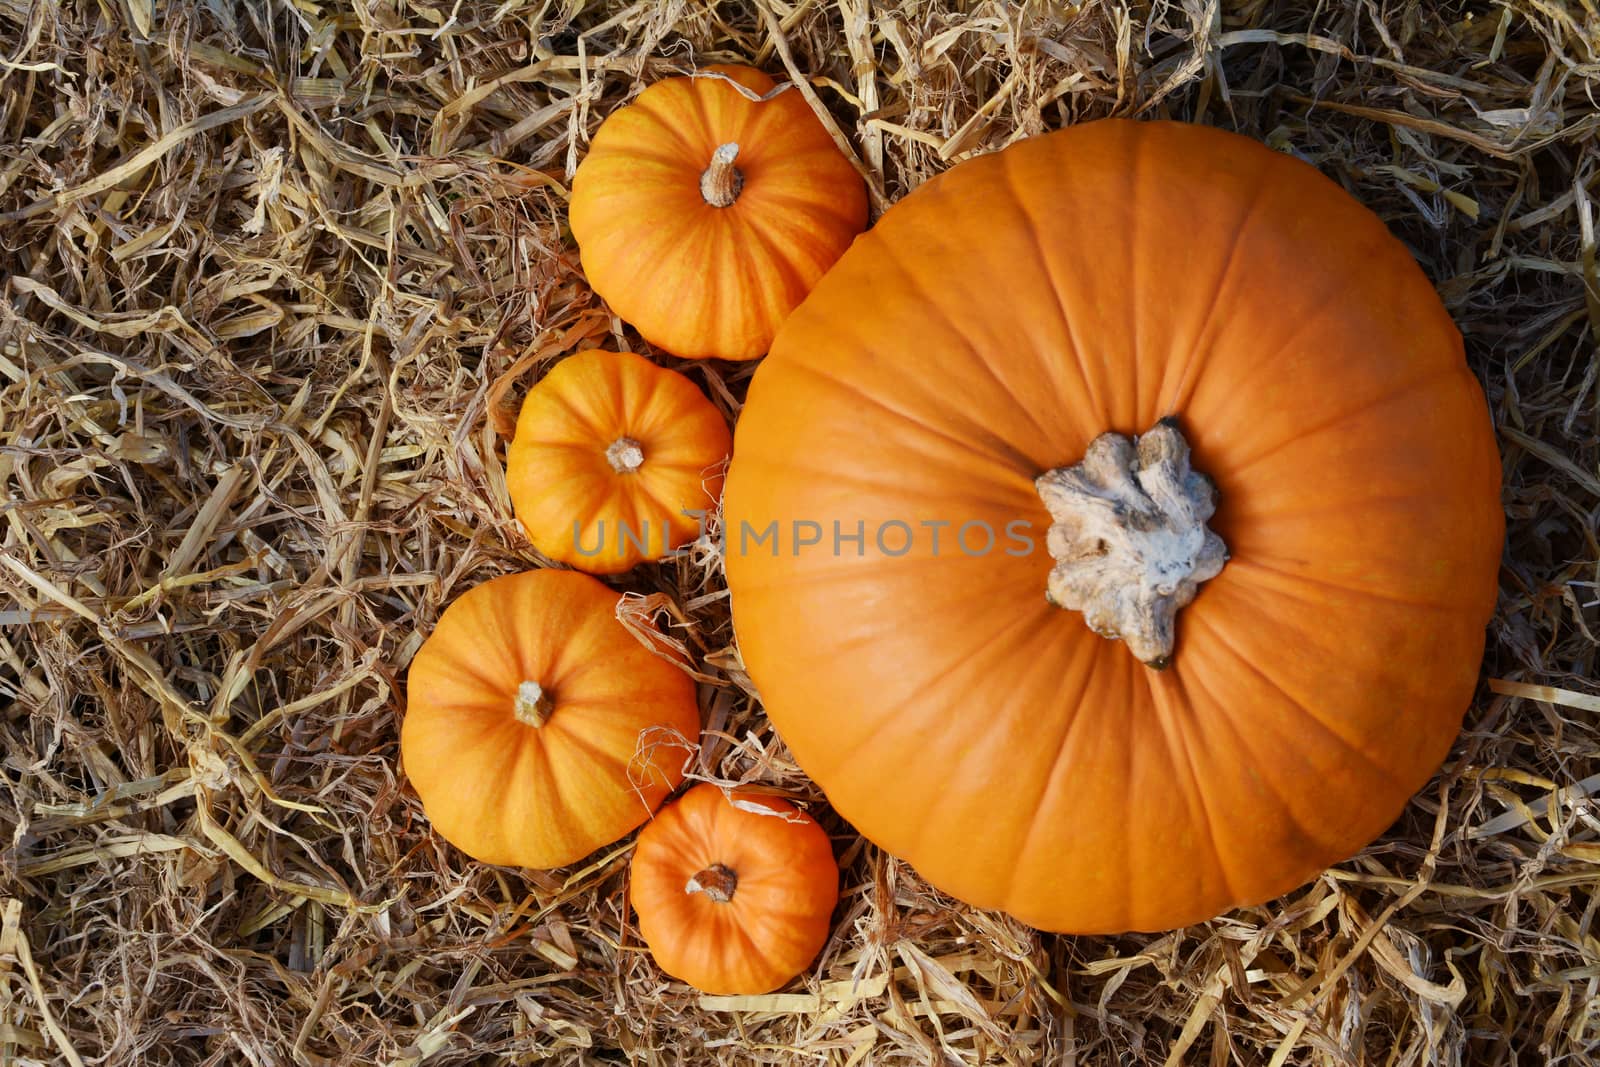 Large autumn pumpkin with four mini gourds seen from above on a bed of soft straw